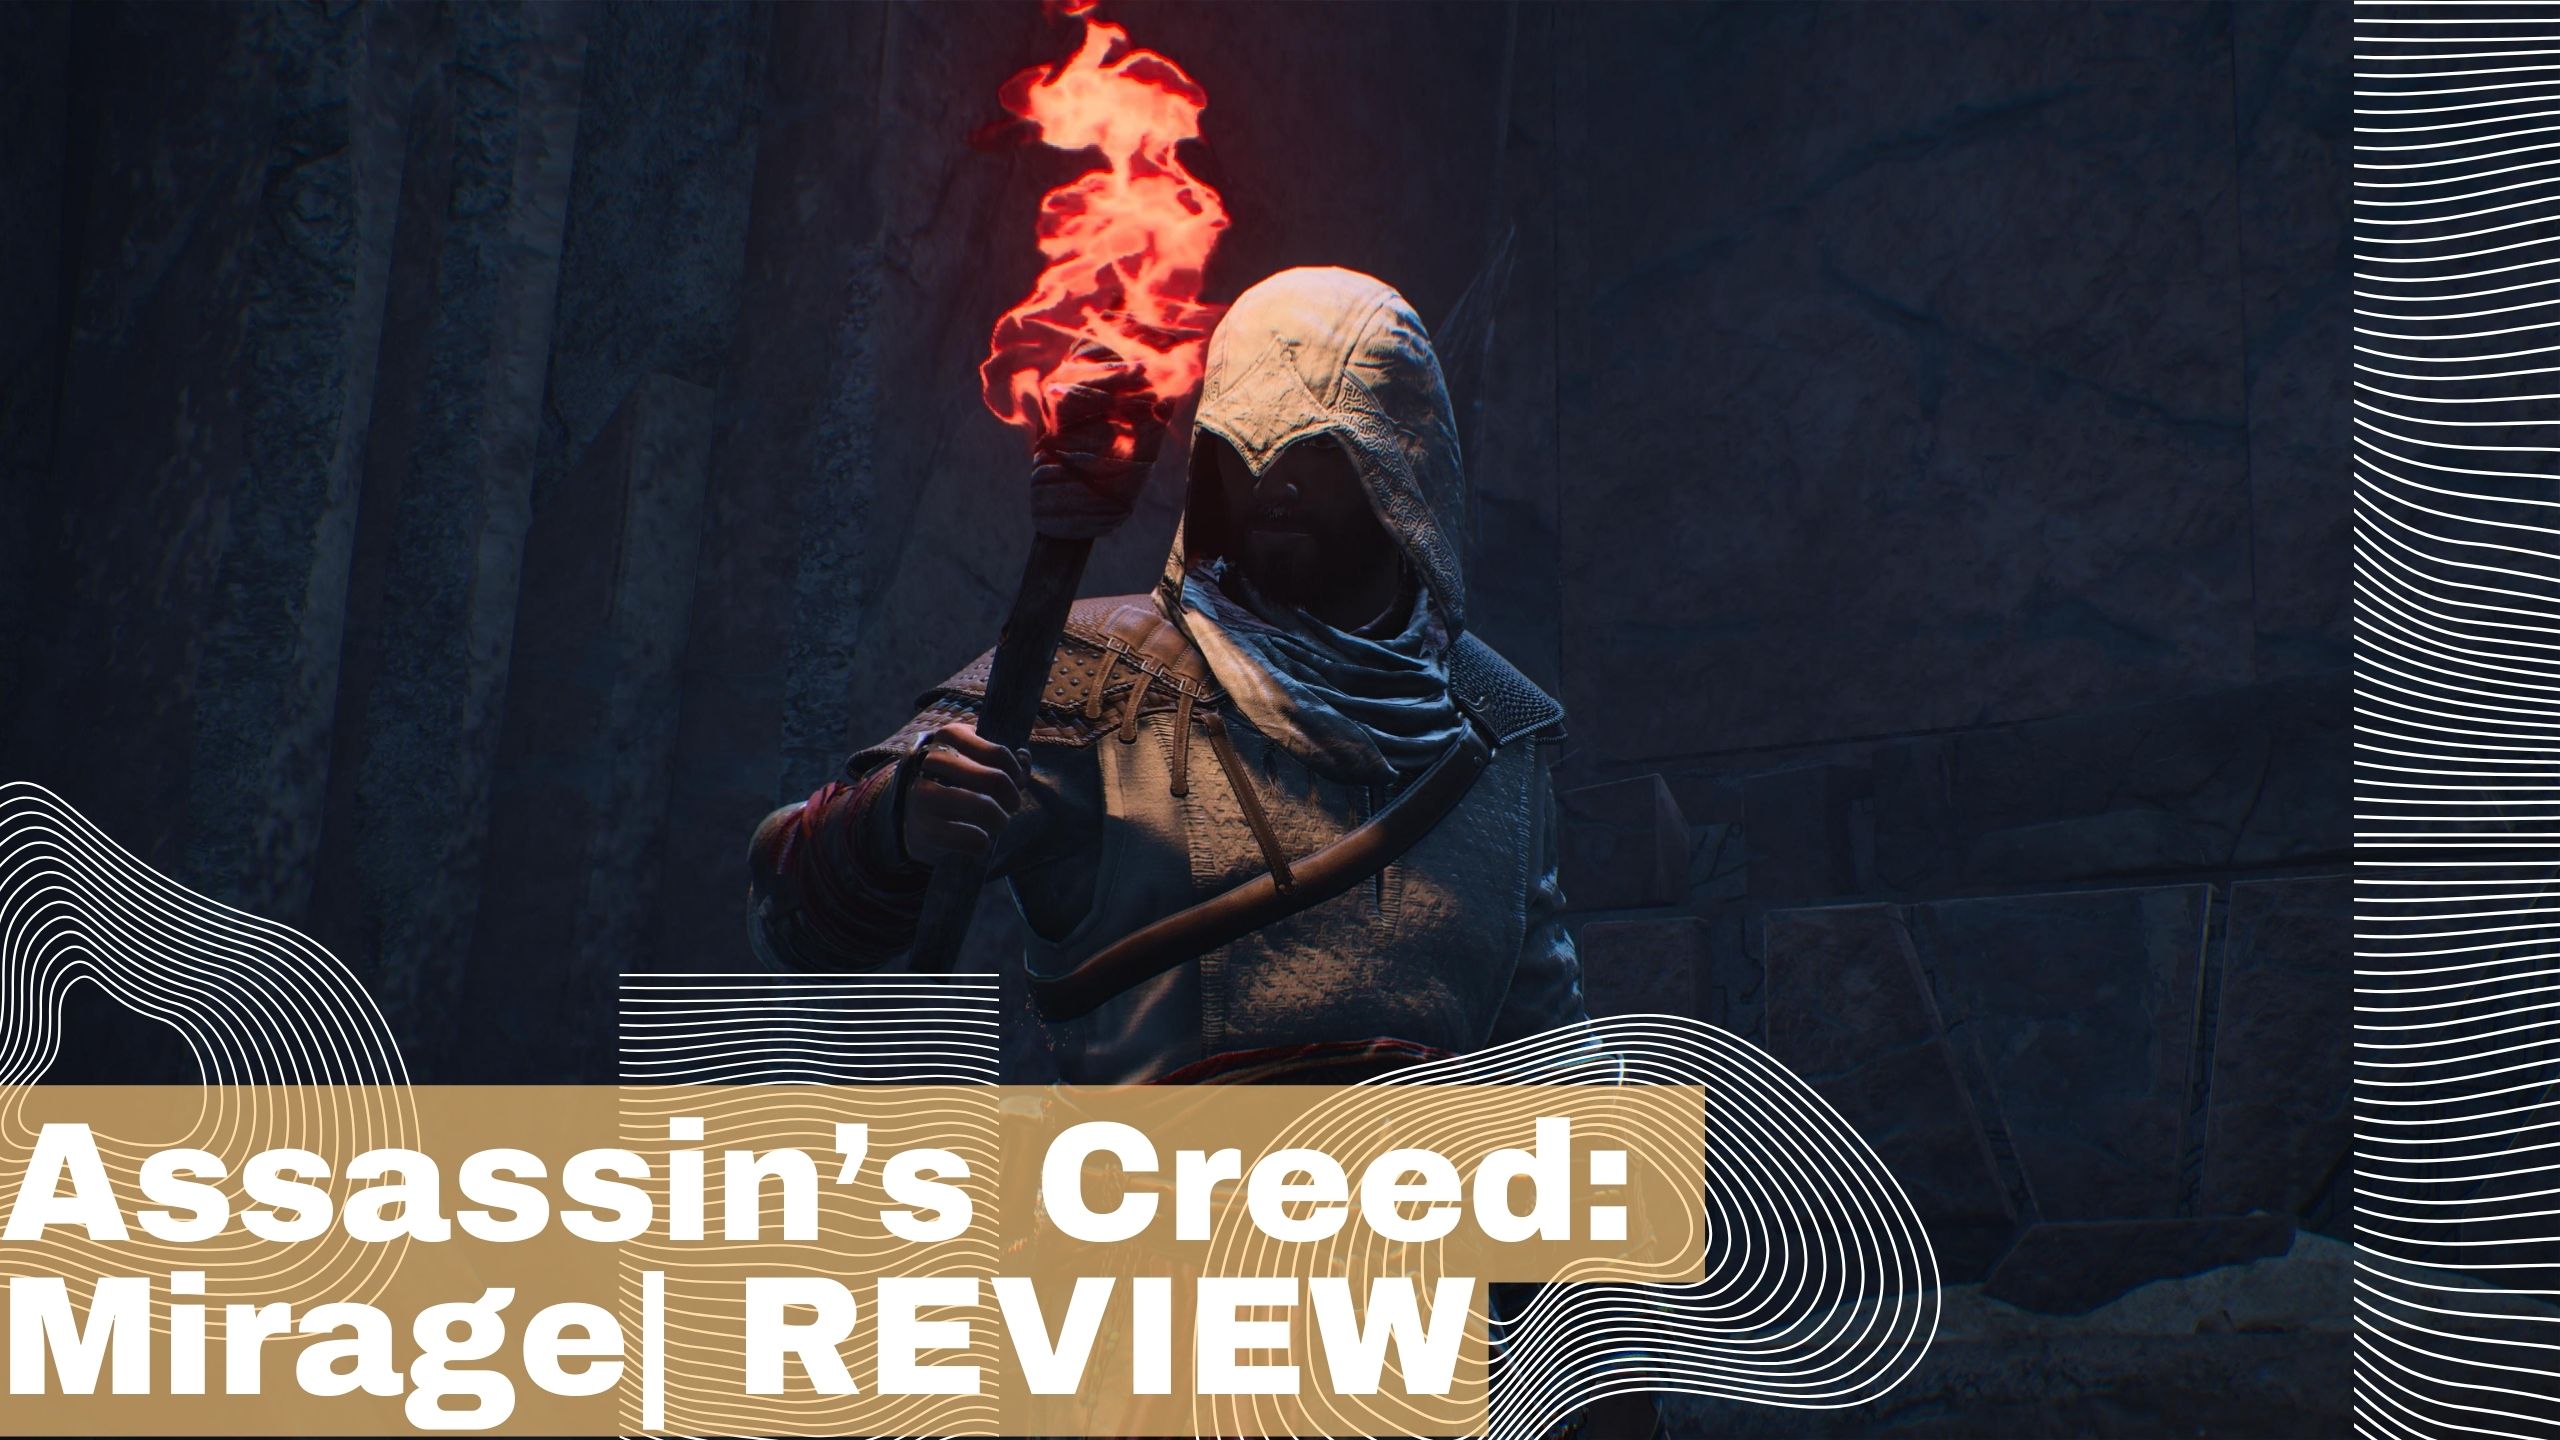 Assassin's Creed 2: In-Depth Analysis – Game Crater